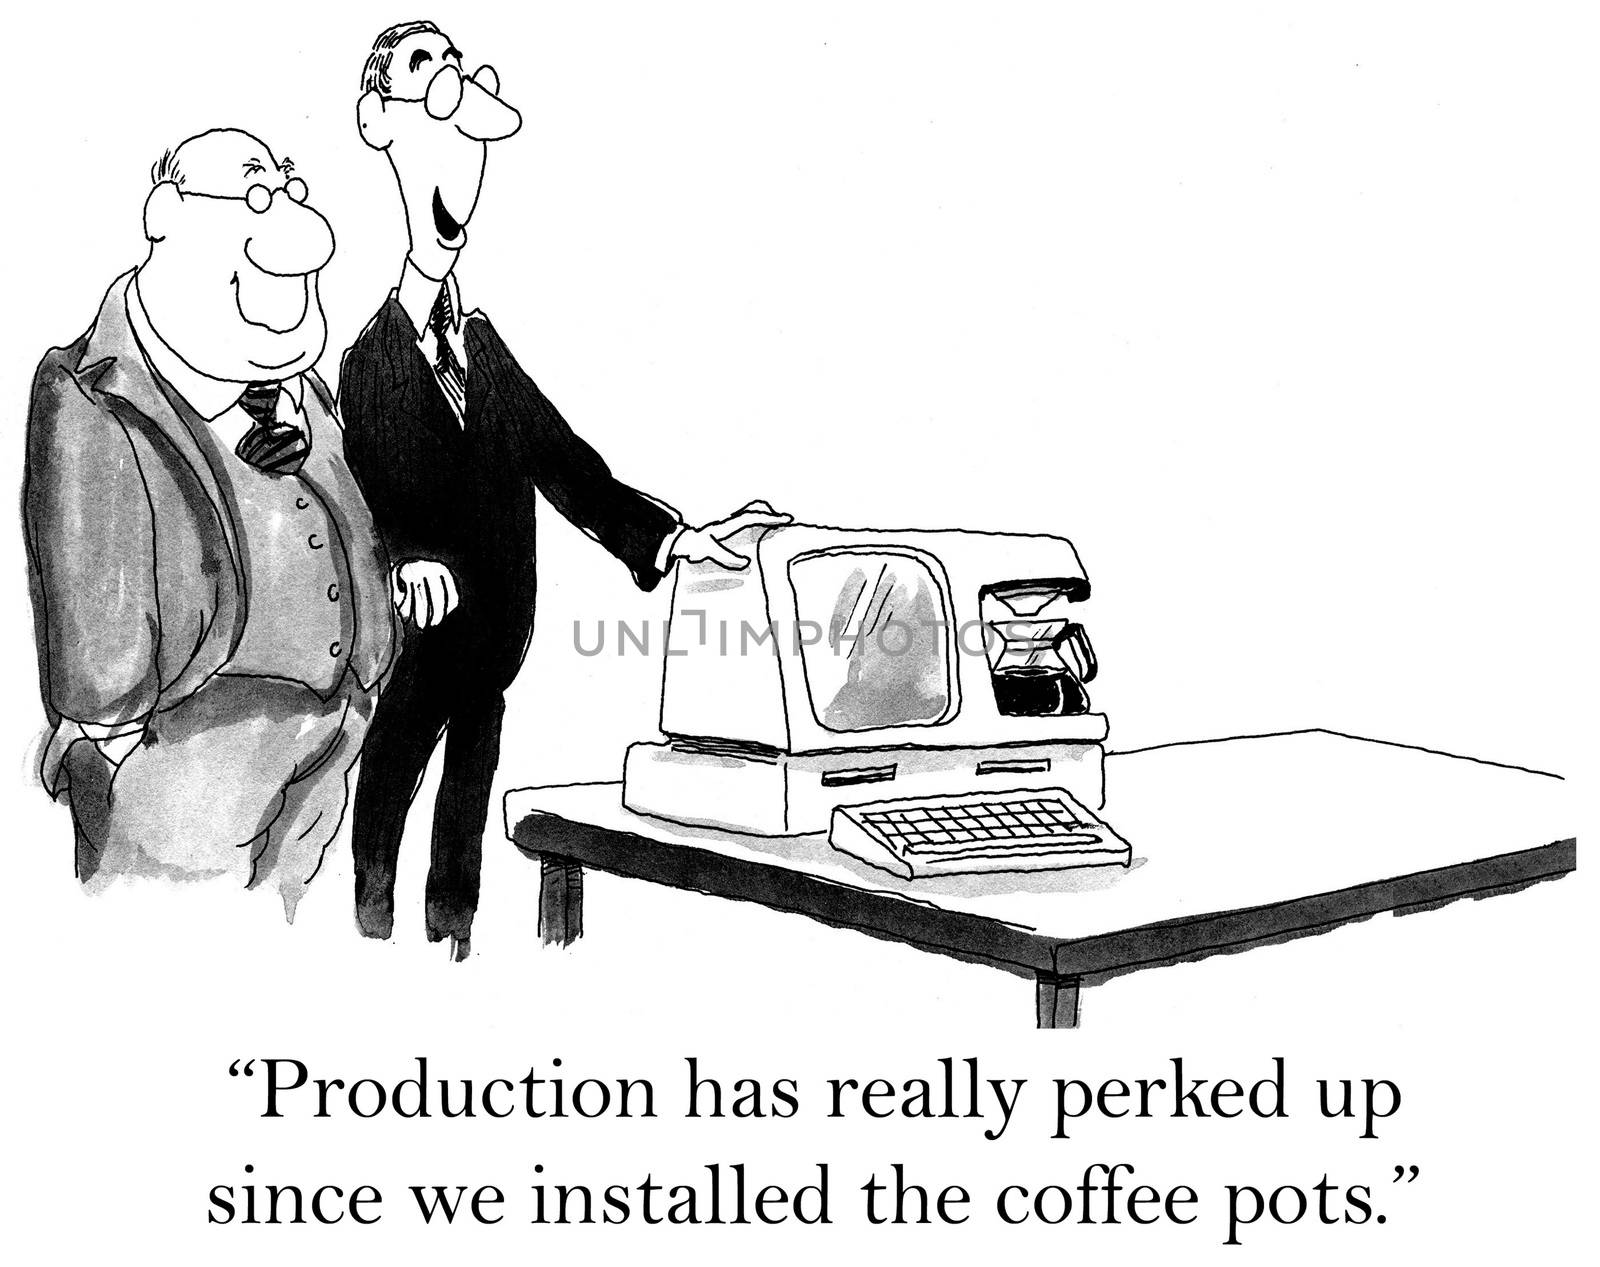 Production has really picked up since we installed coffee pots. by andrewgenn